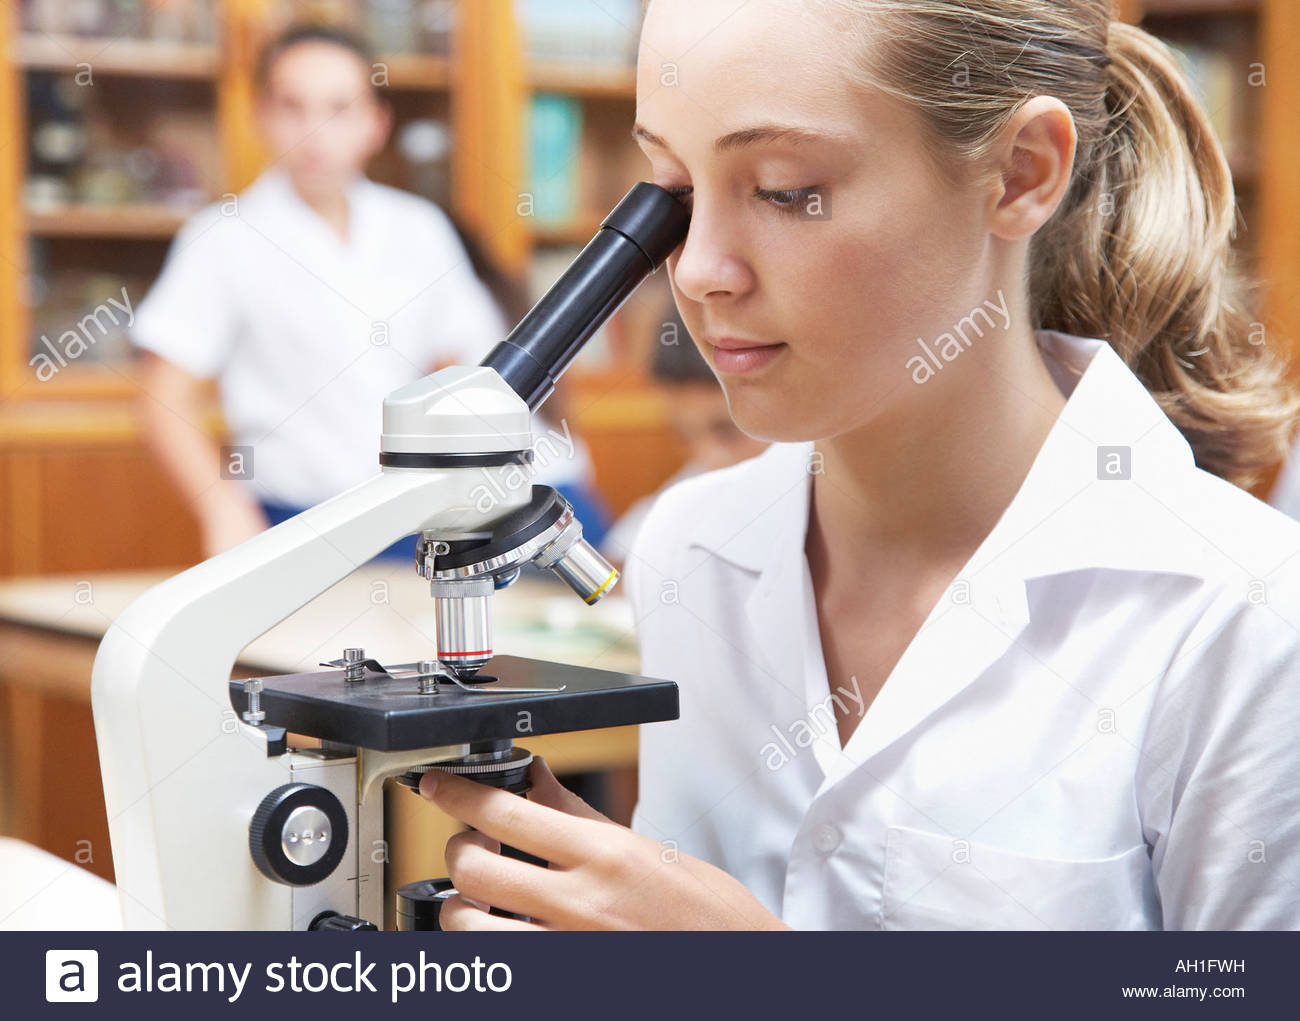 students-in-science-class-AH1FWH.jpg